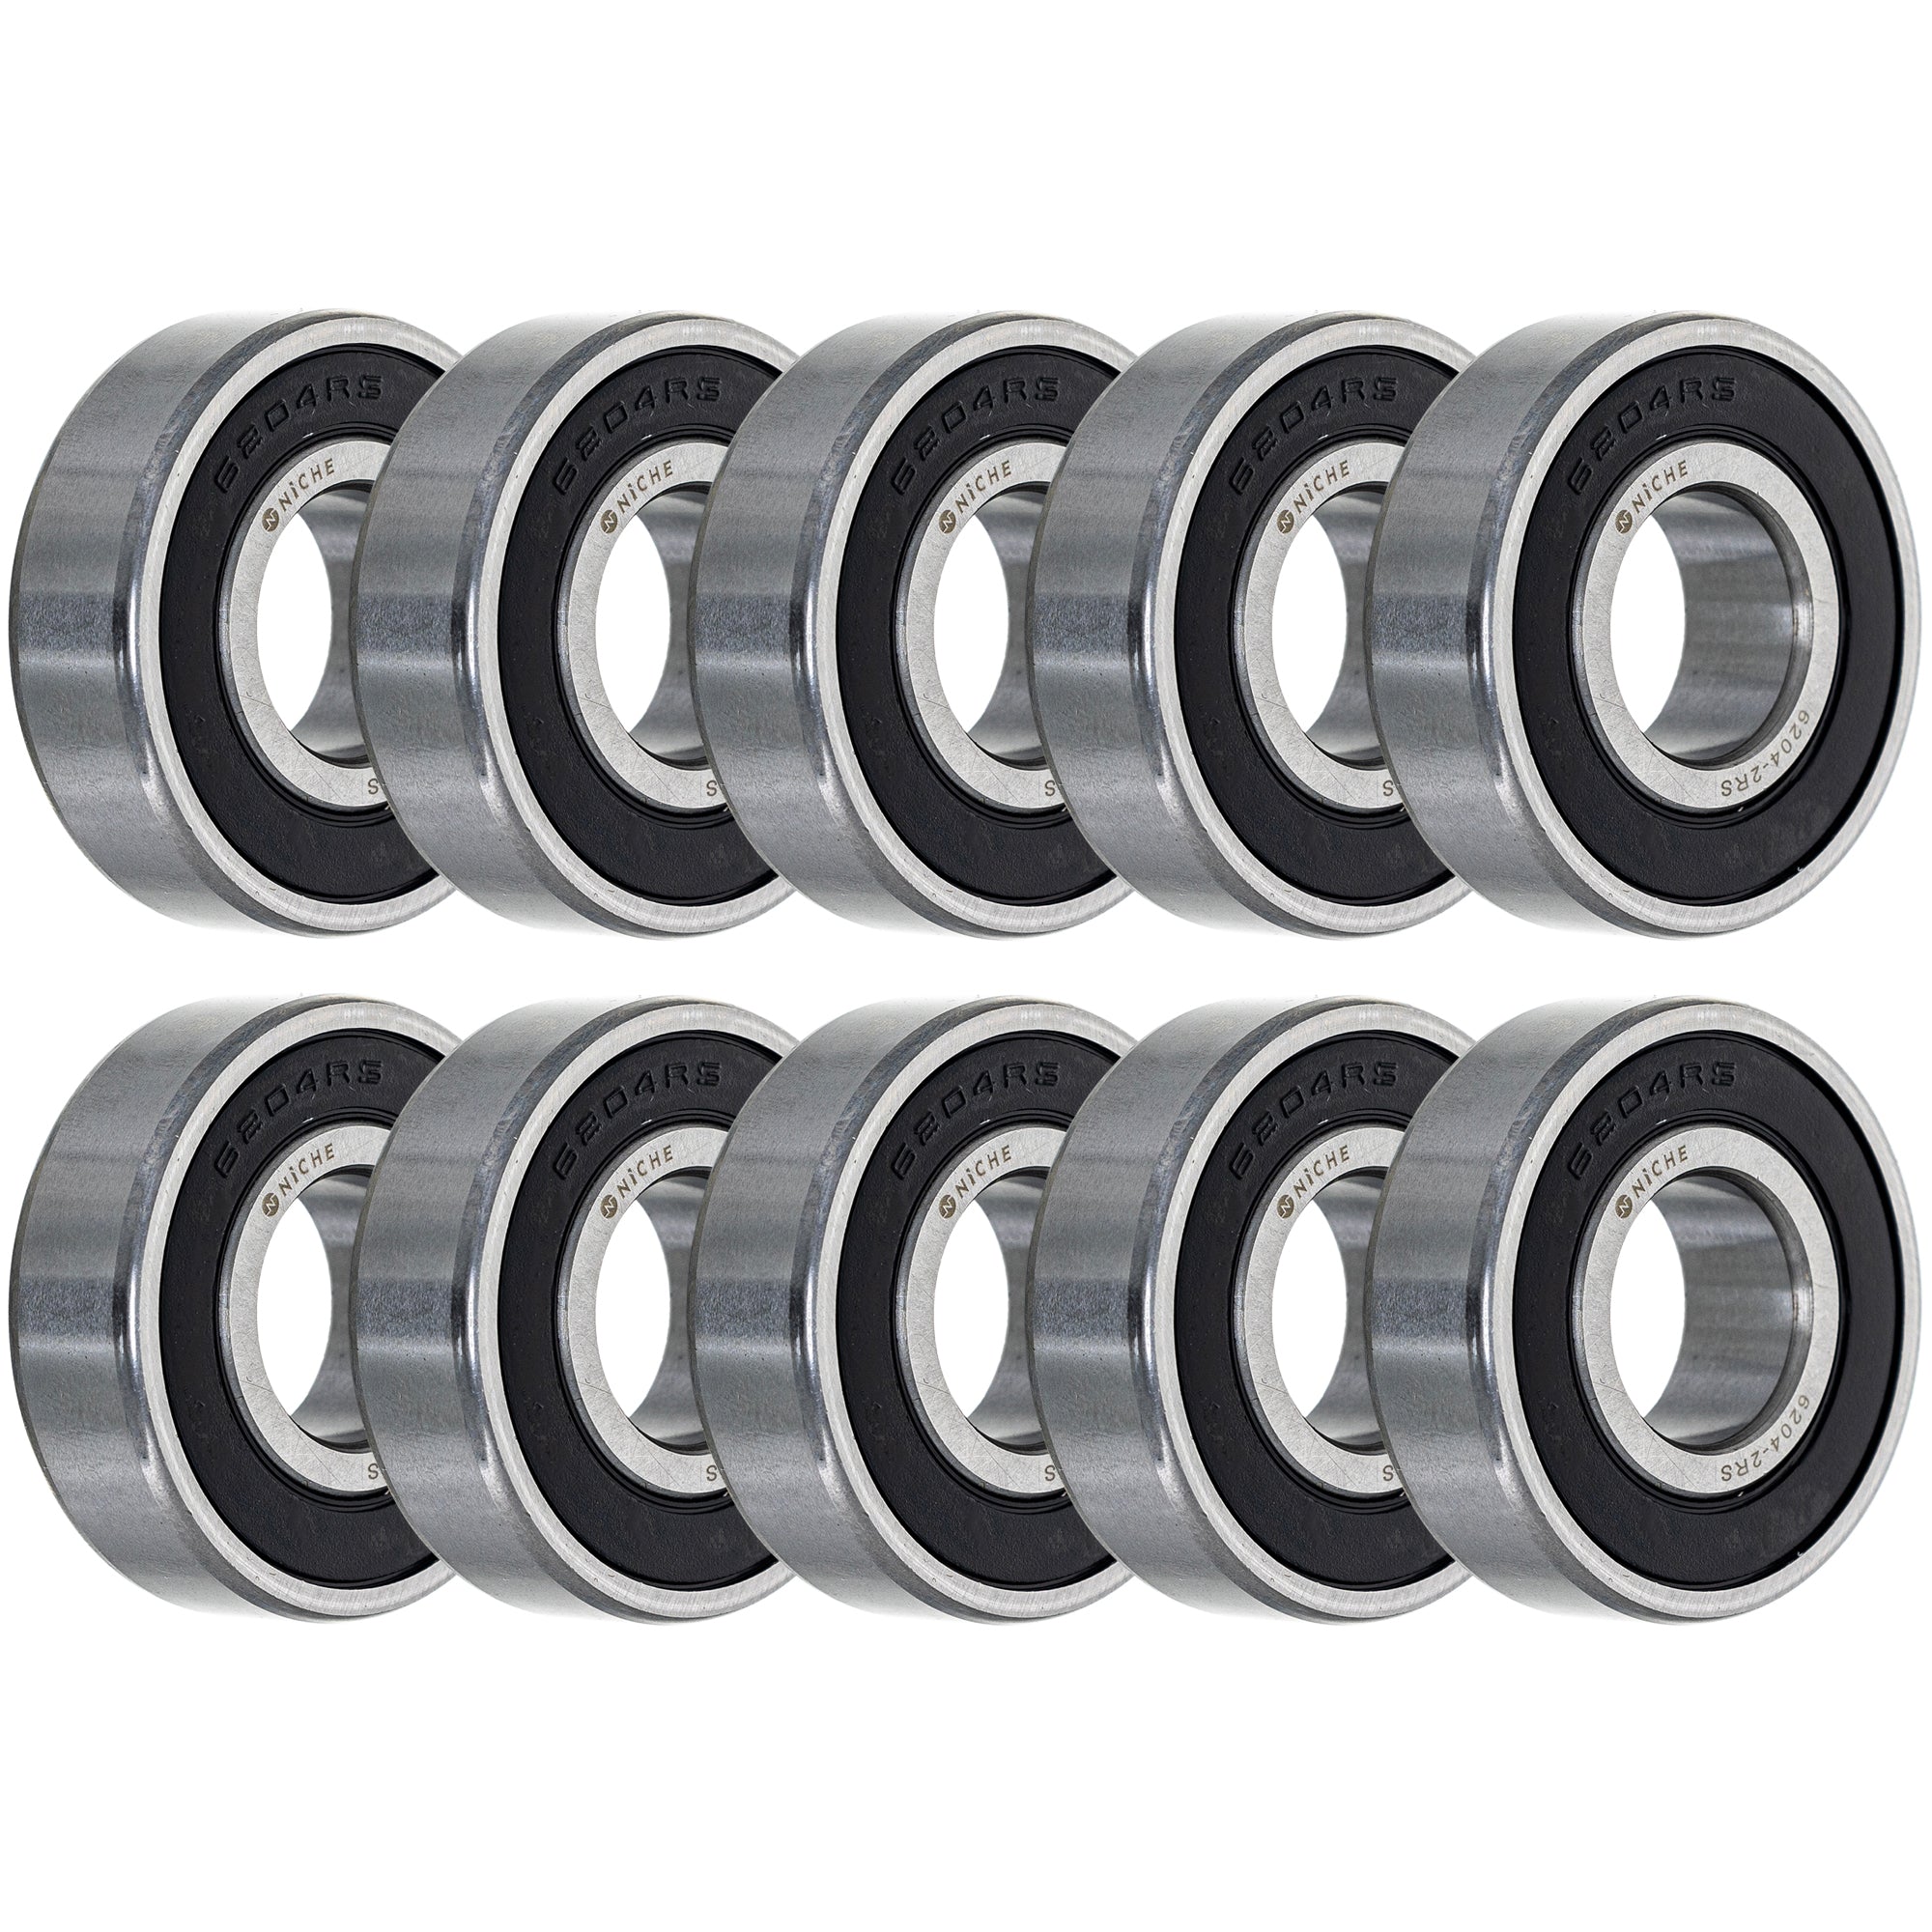 Single Row, Deep Groove, Ball Bearing Pack of 10 10-Pack for zOTHER Snapper MURRAY Murray NICHE 519-CBB2229R